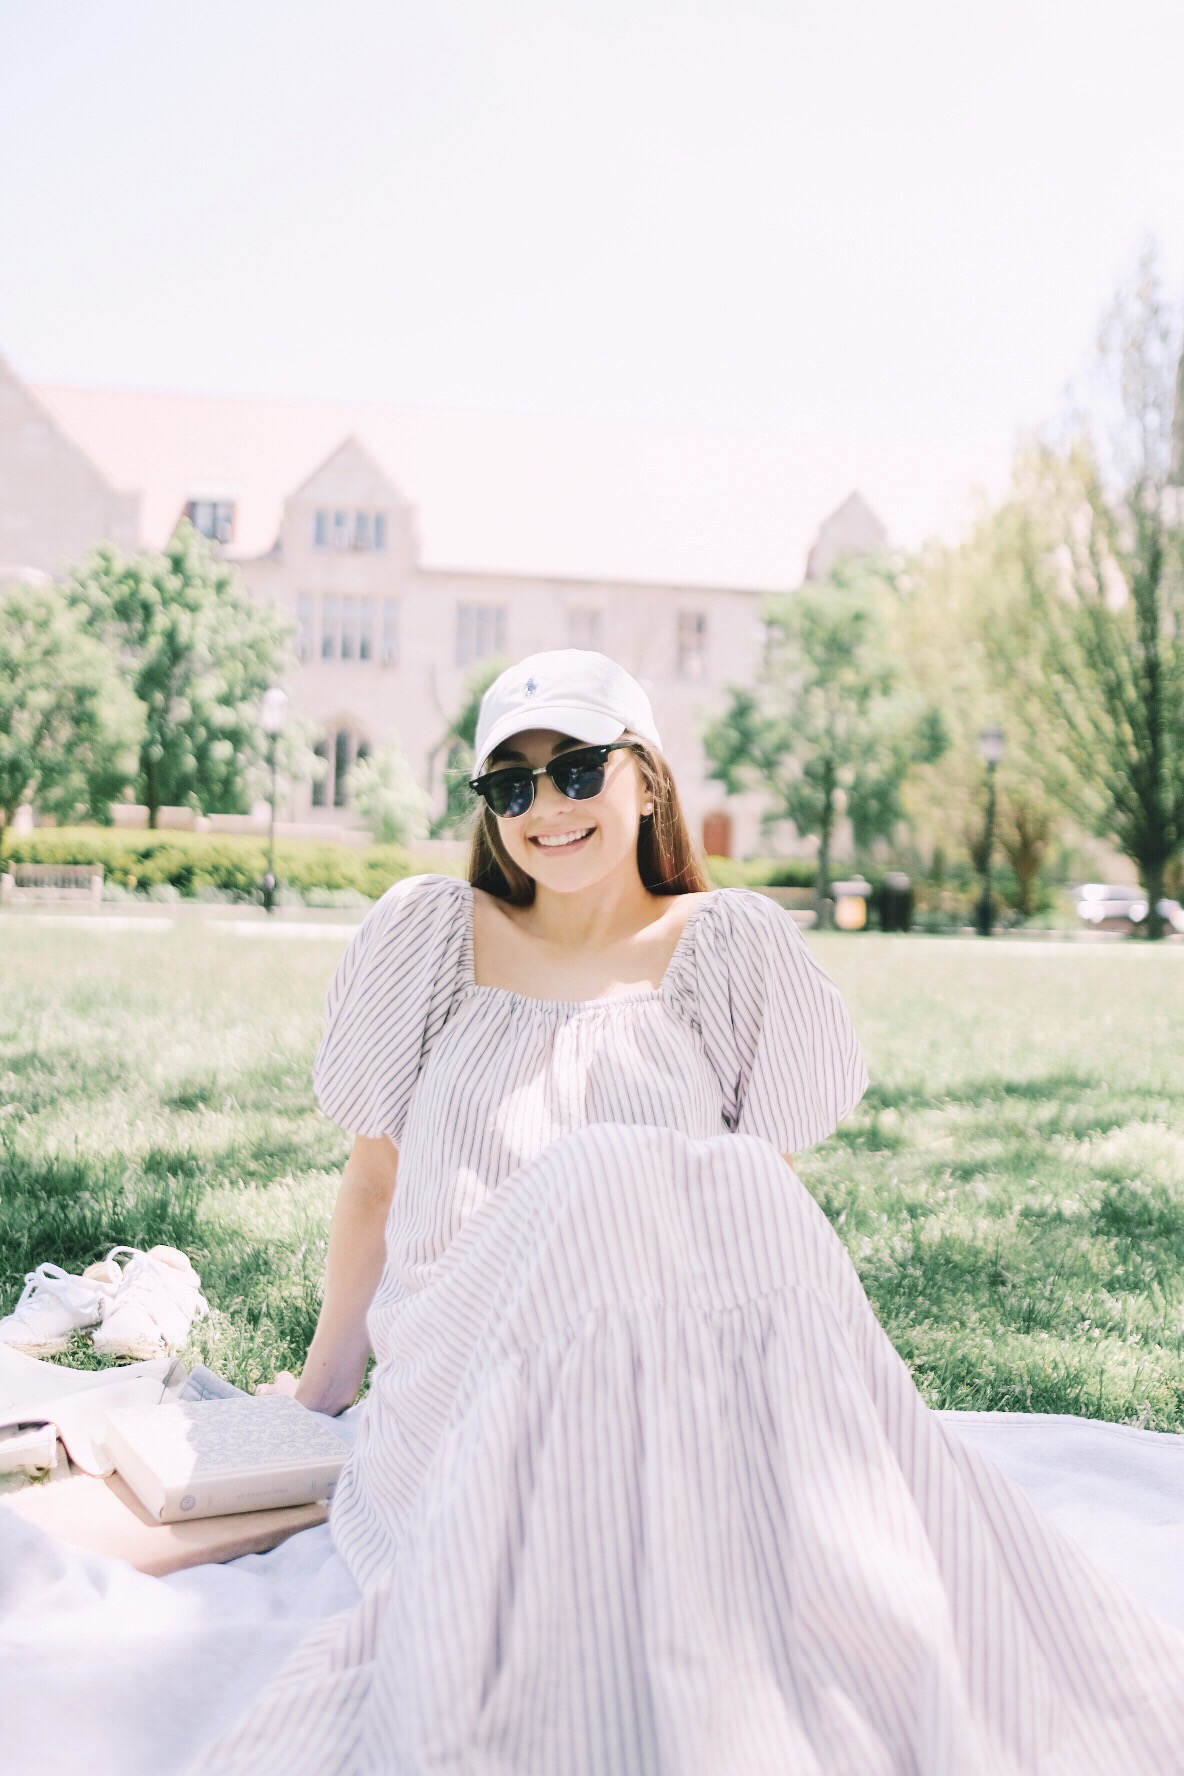 clubmaster style sunglasses | Miss Madeline Rose